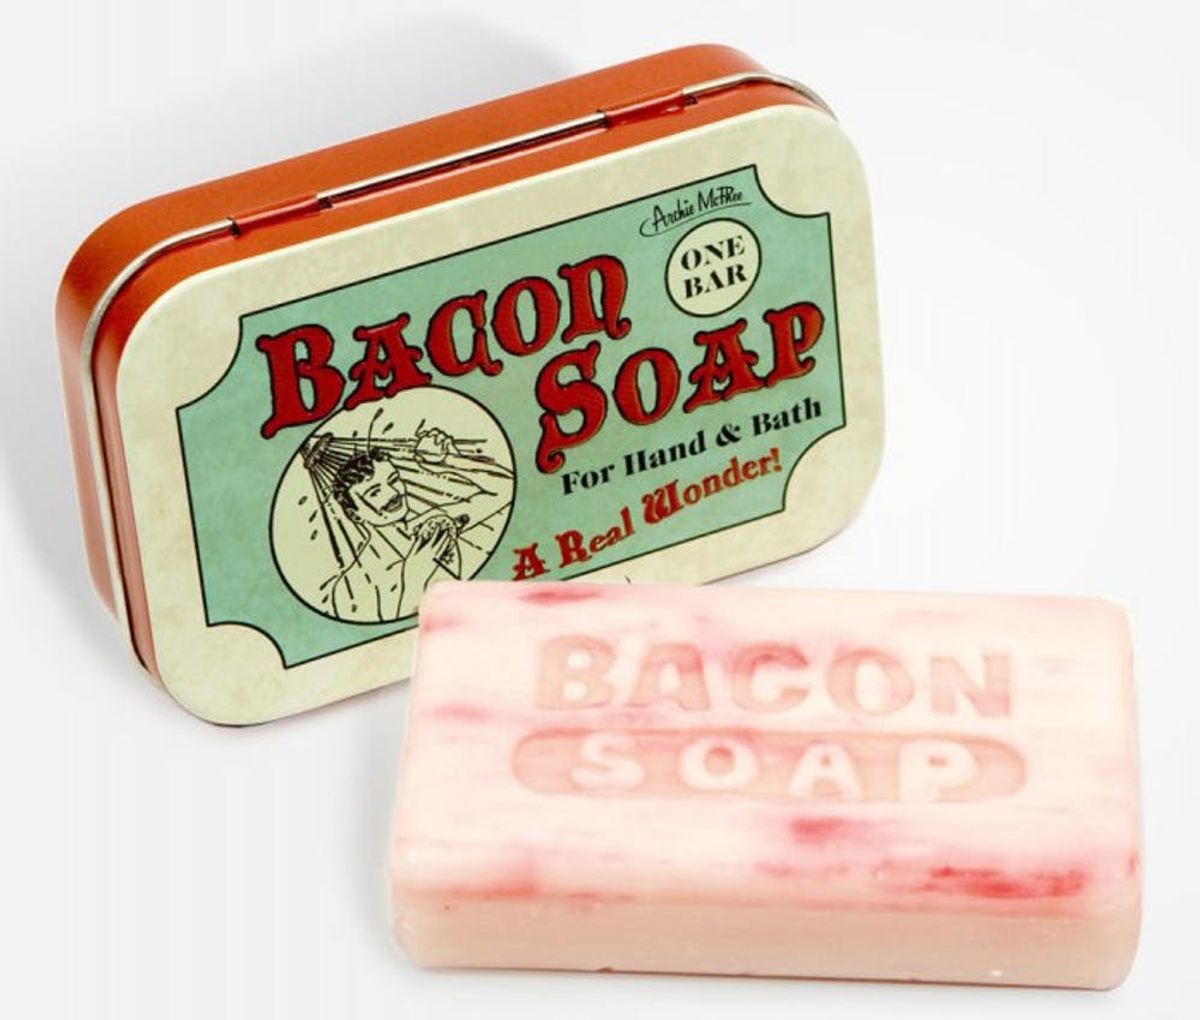 25 Soaps That Will Make You Want to Shower More Often